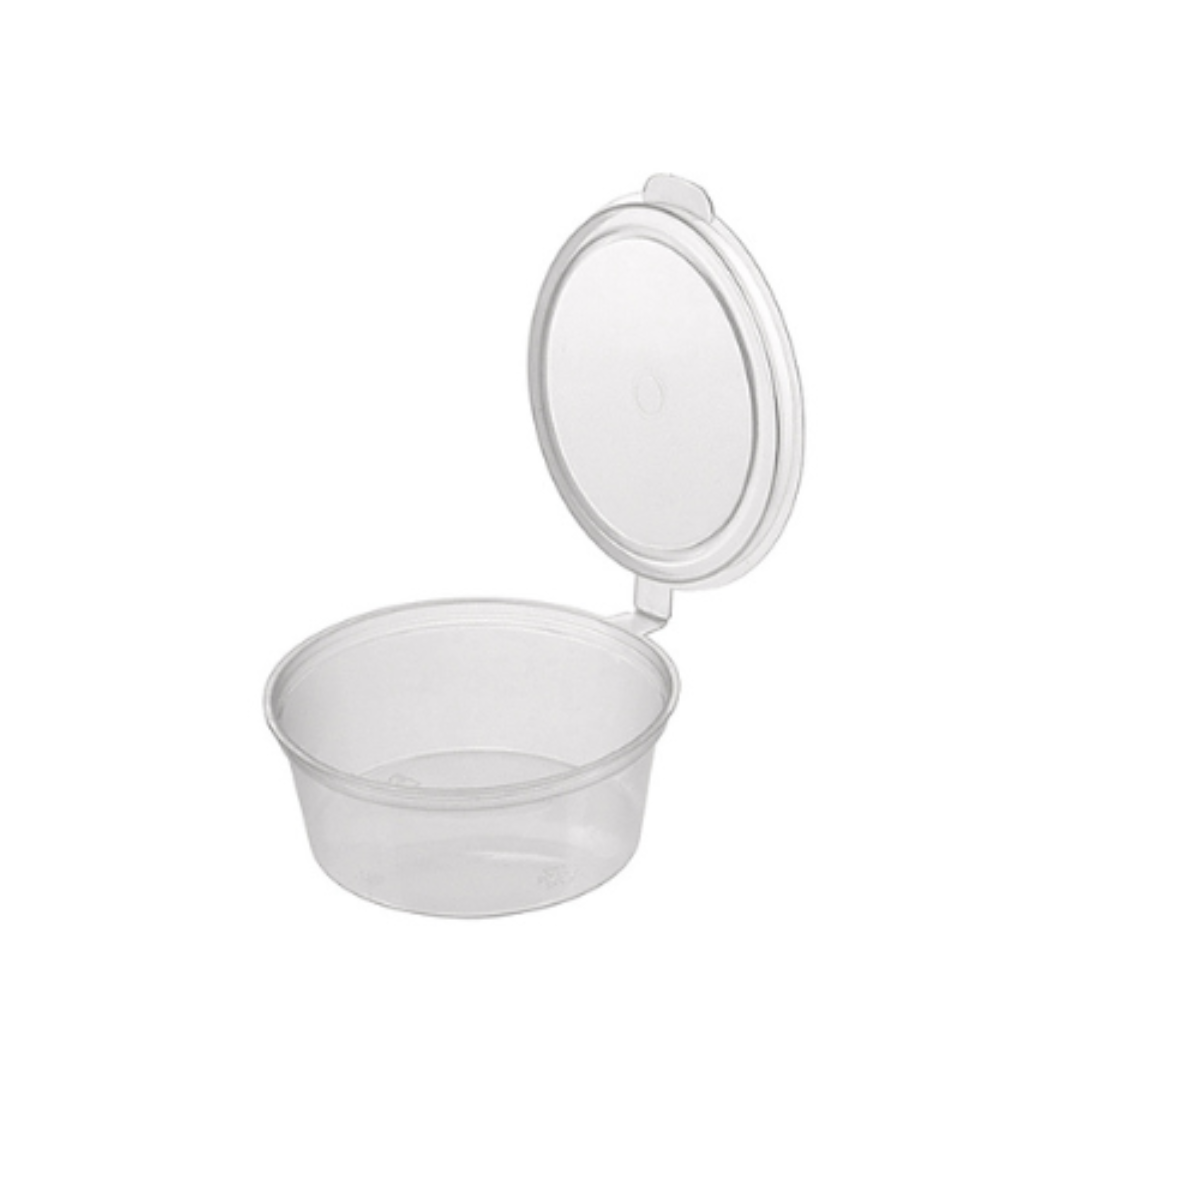 Hinged Lid Injected PP Round Sauce Containers - Sanplast